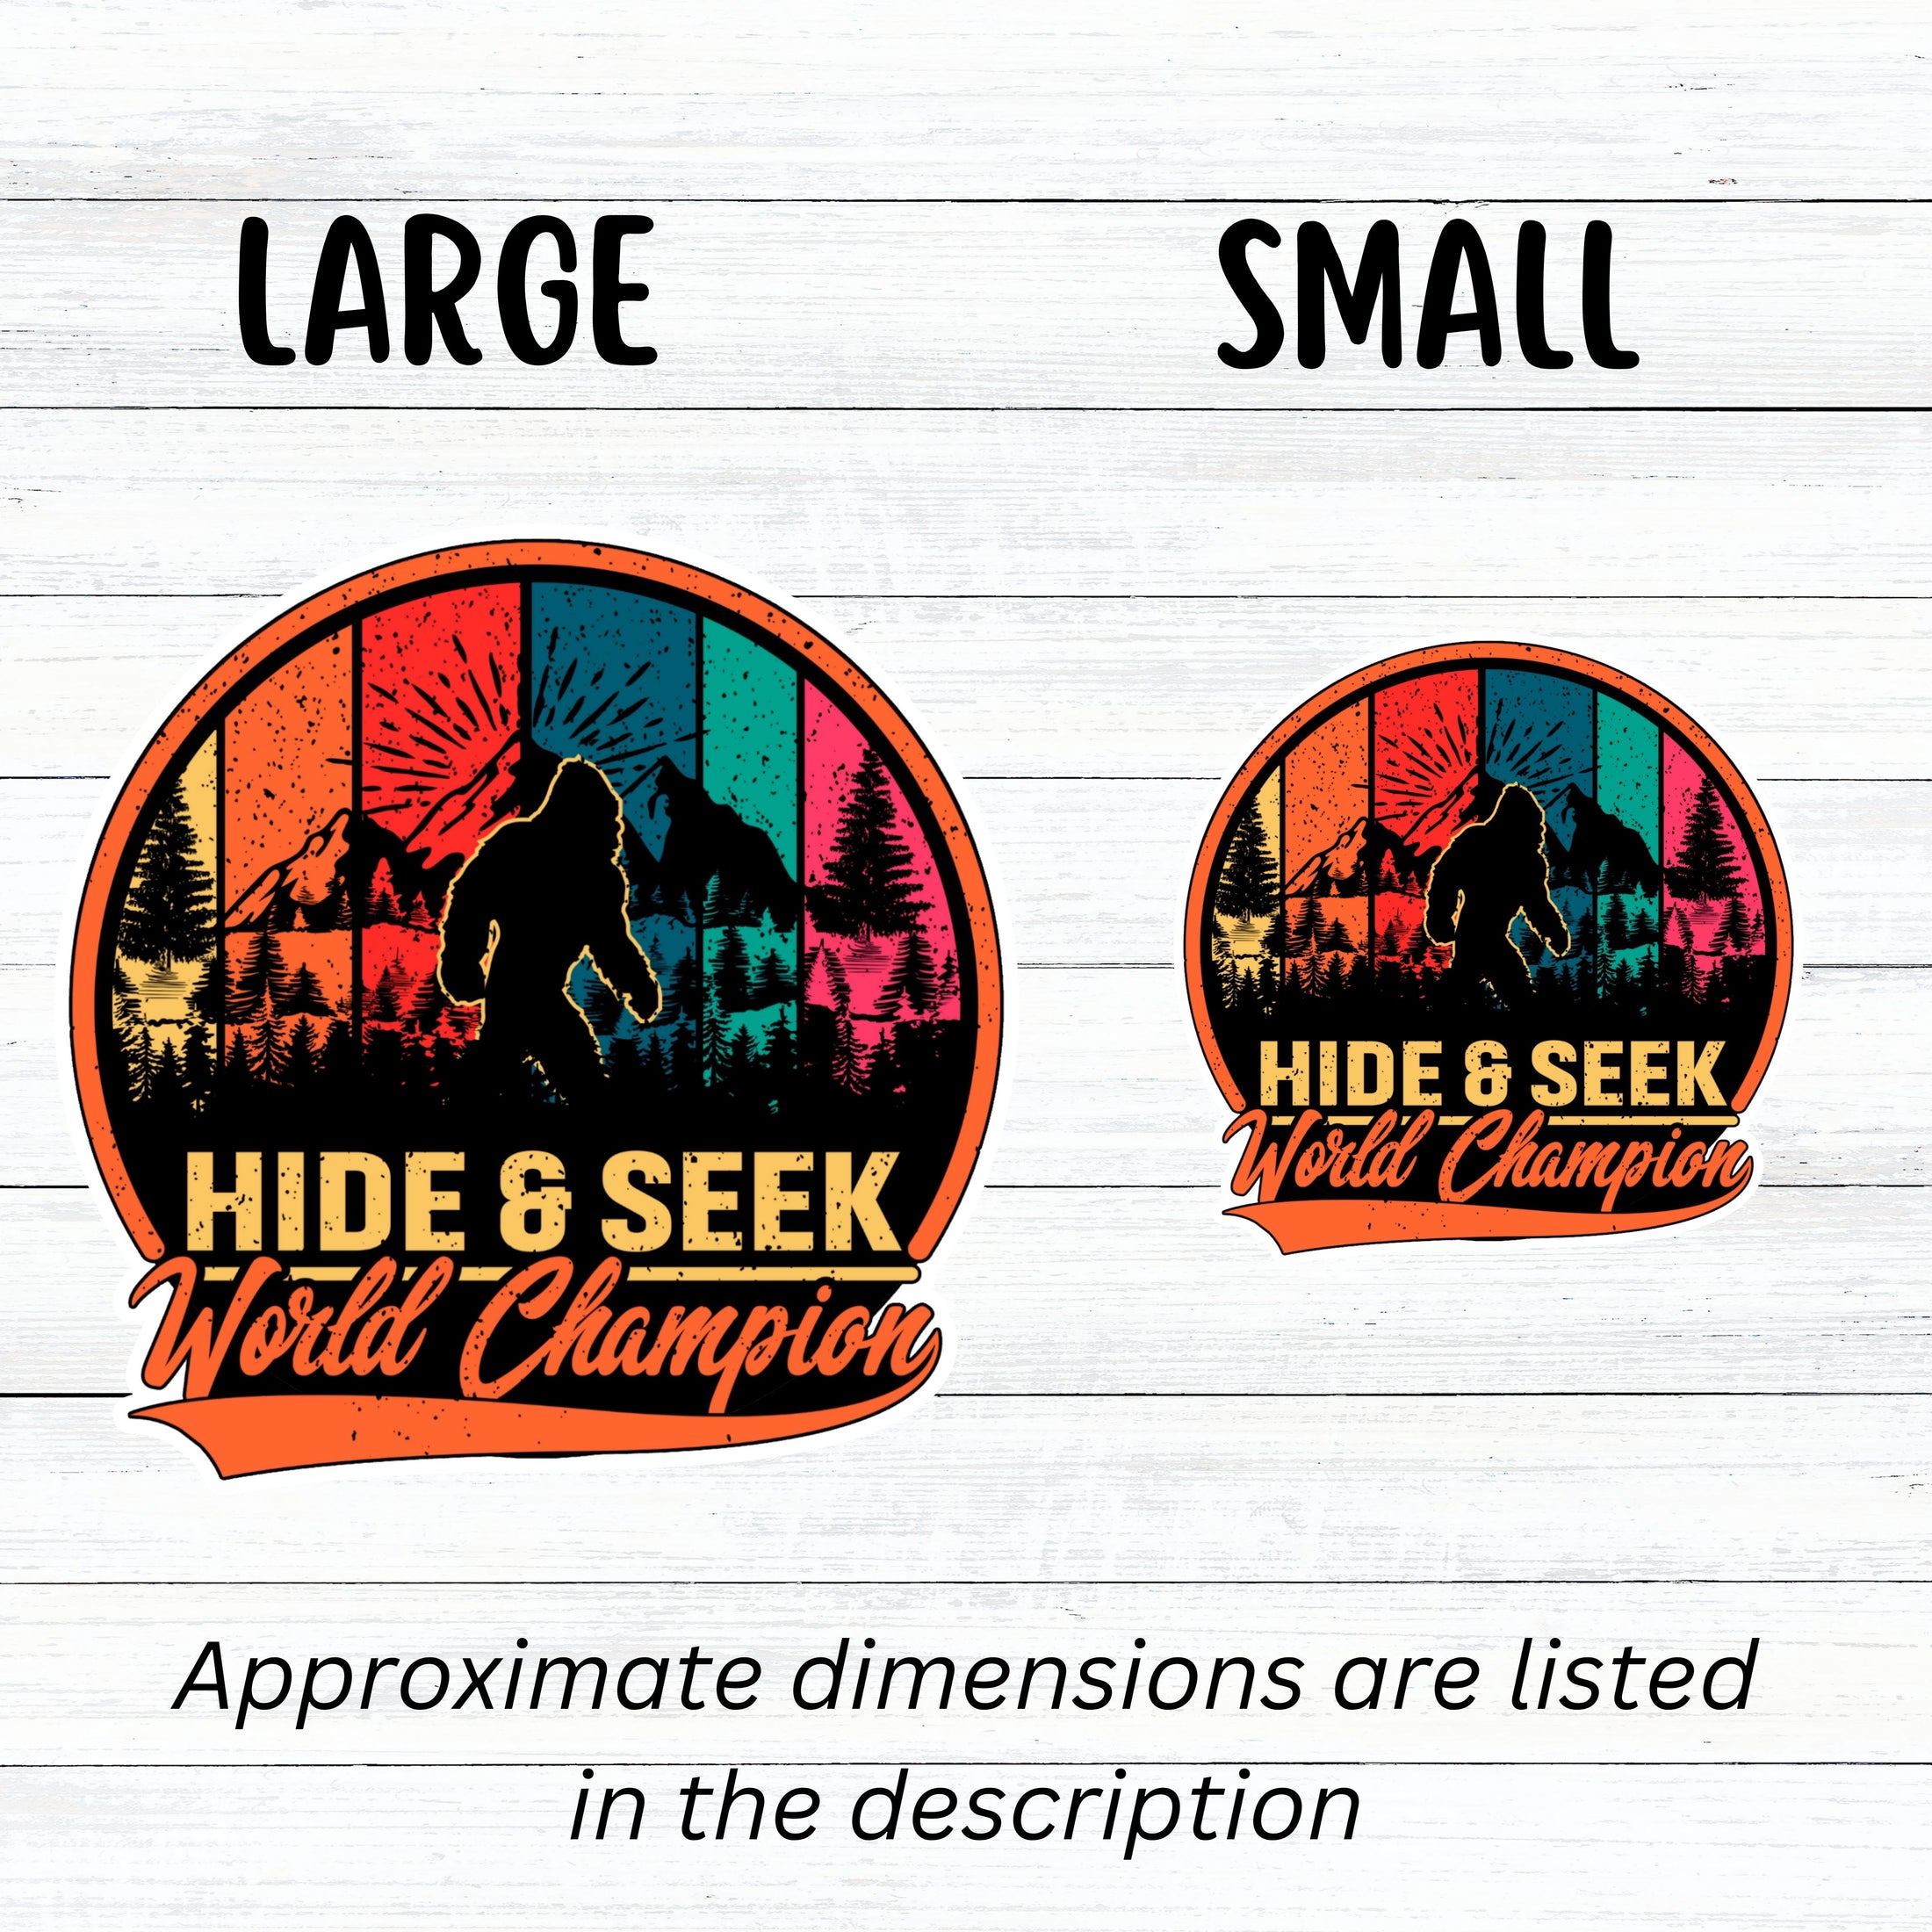 This image shows large and small hide & seek stickers next to each other.